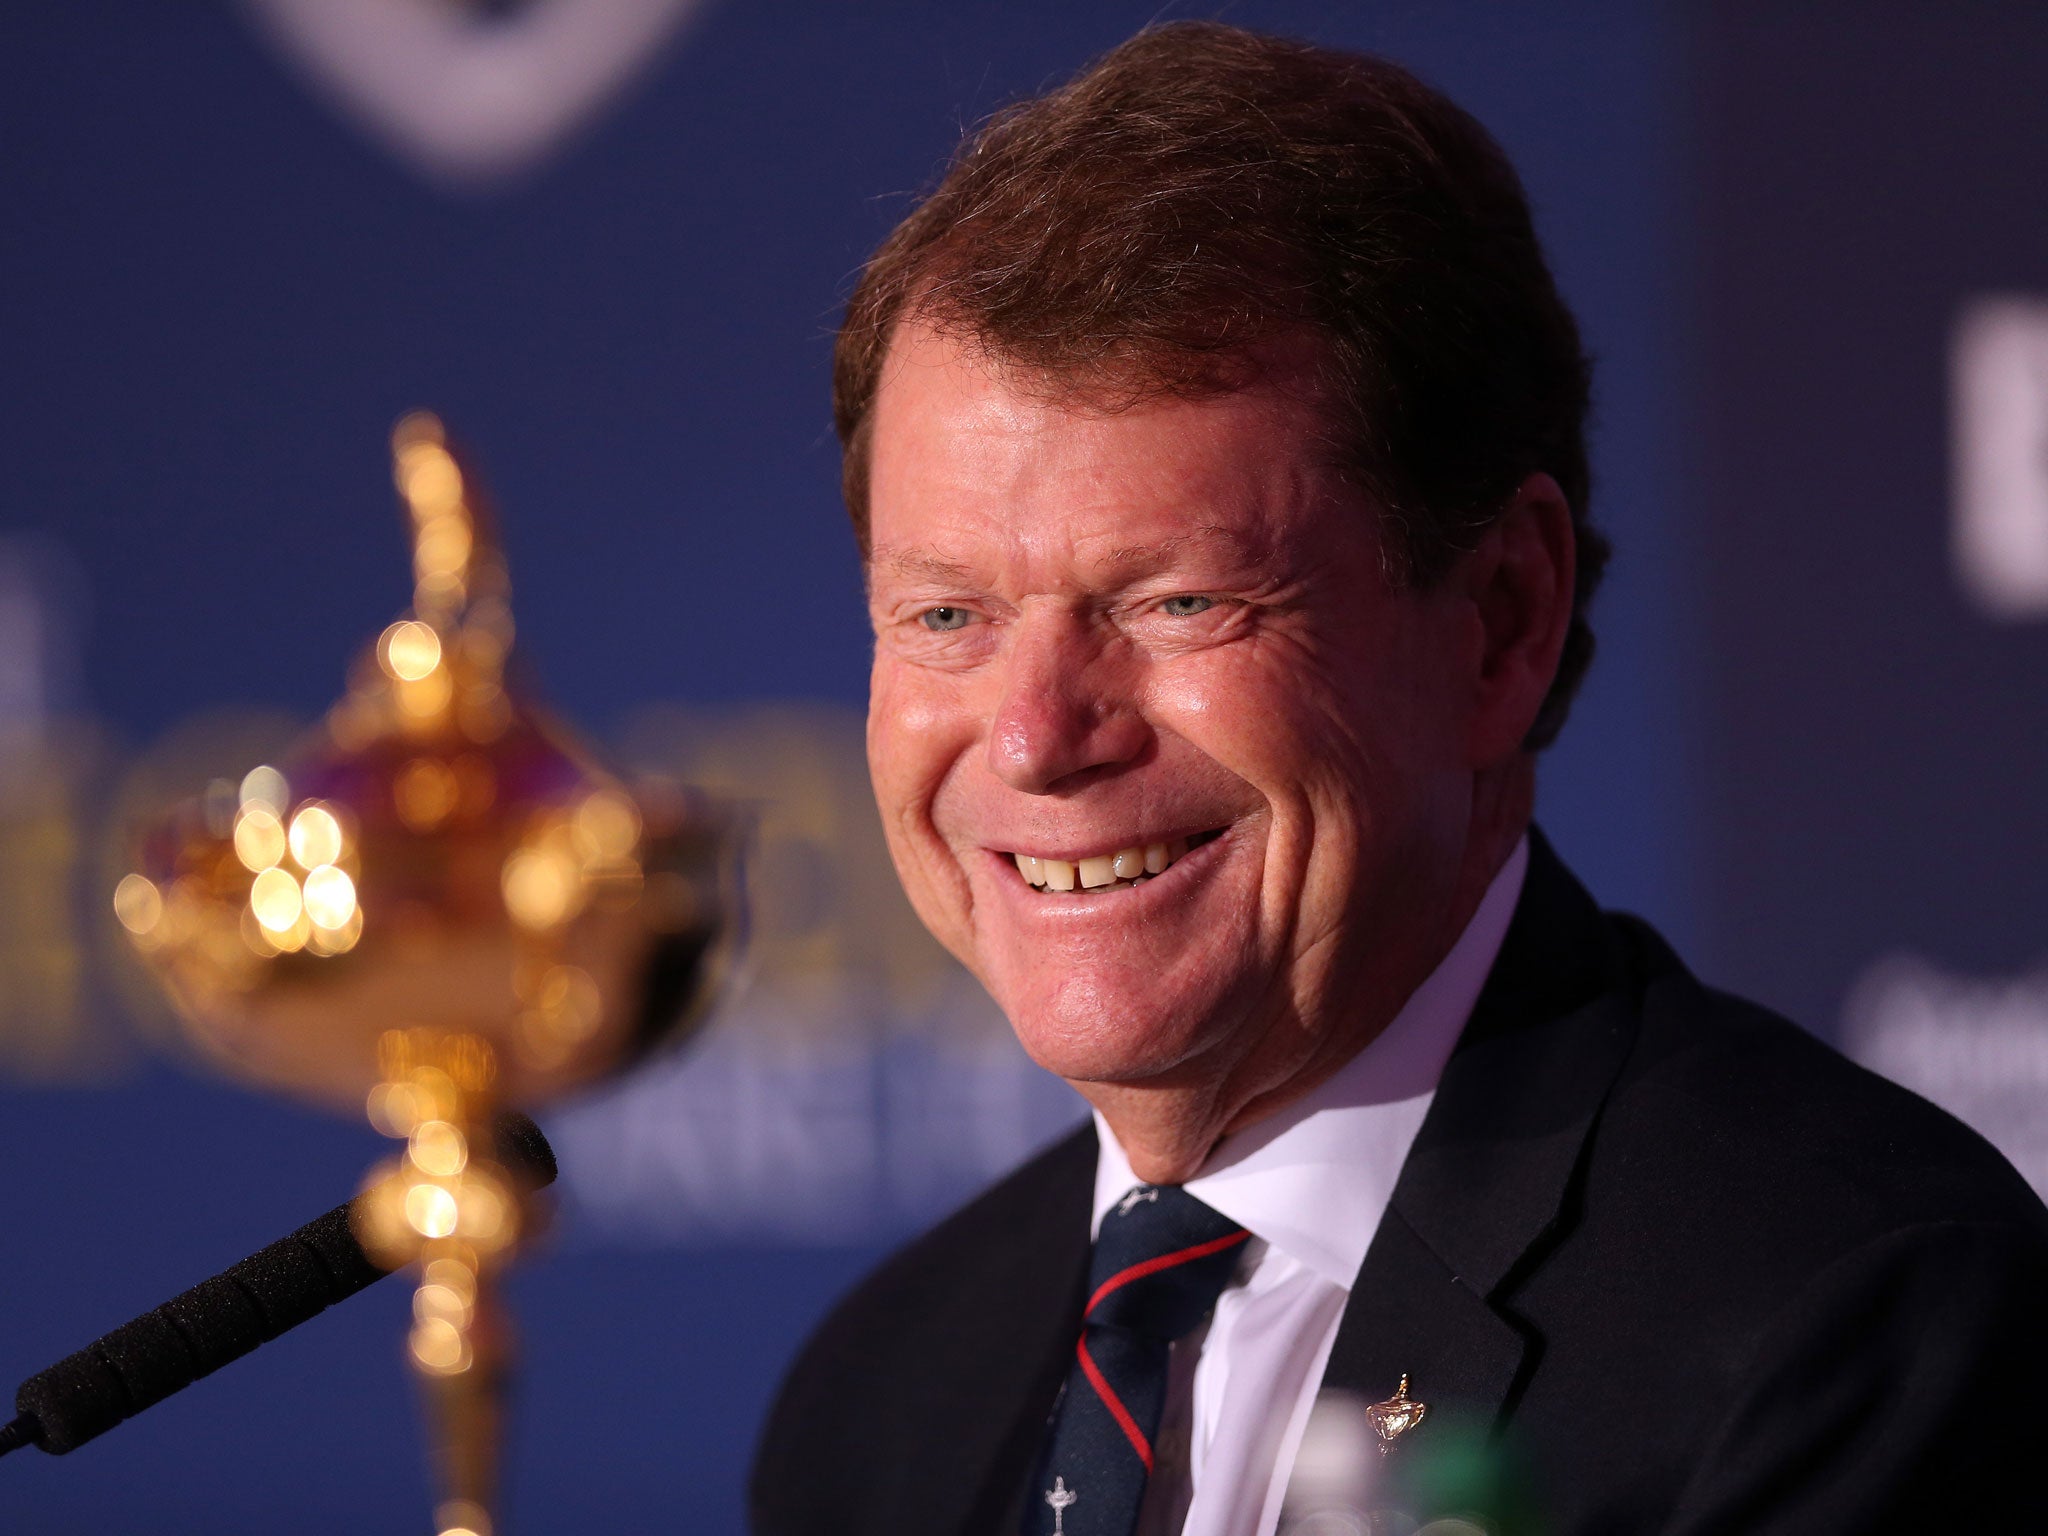 American Ryder Cup captain Tom Watson wants to get rid of the captain's picks and have the 12 best players from the USA and Europe compete